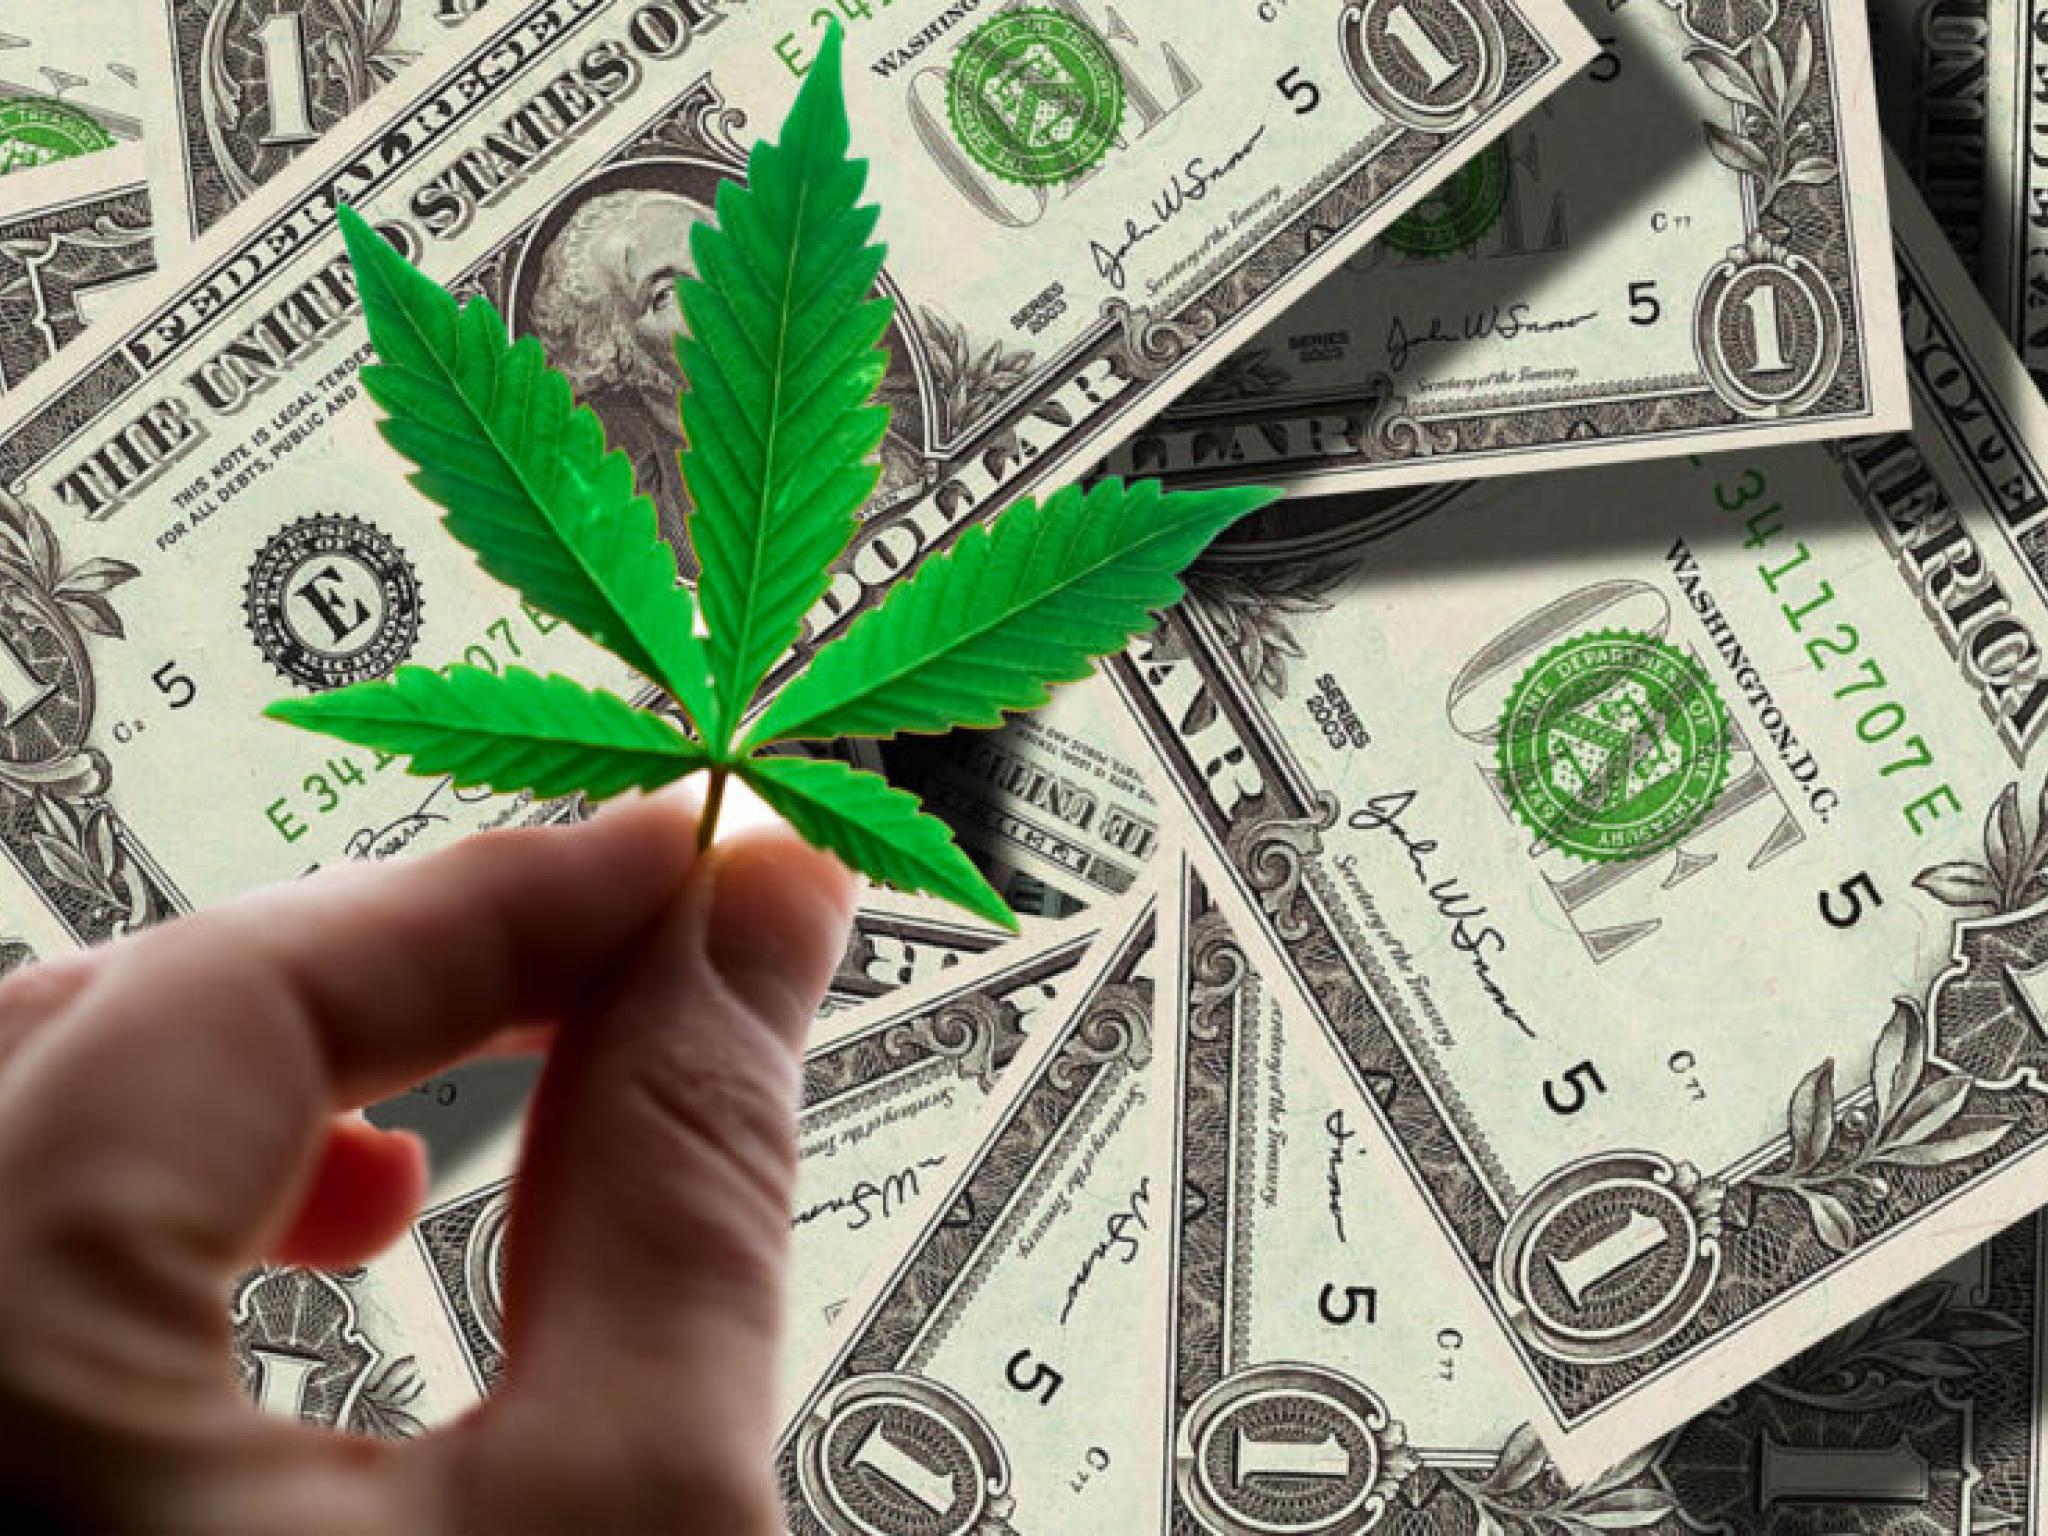  new-york-weed-giant-the-cannabist-is-selling-its-florida-business-heres-why 